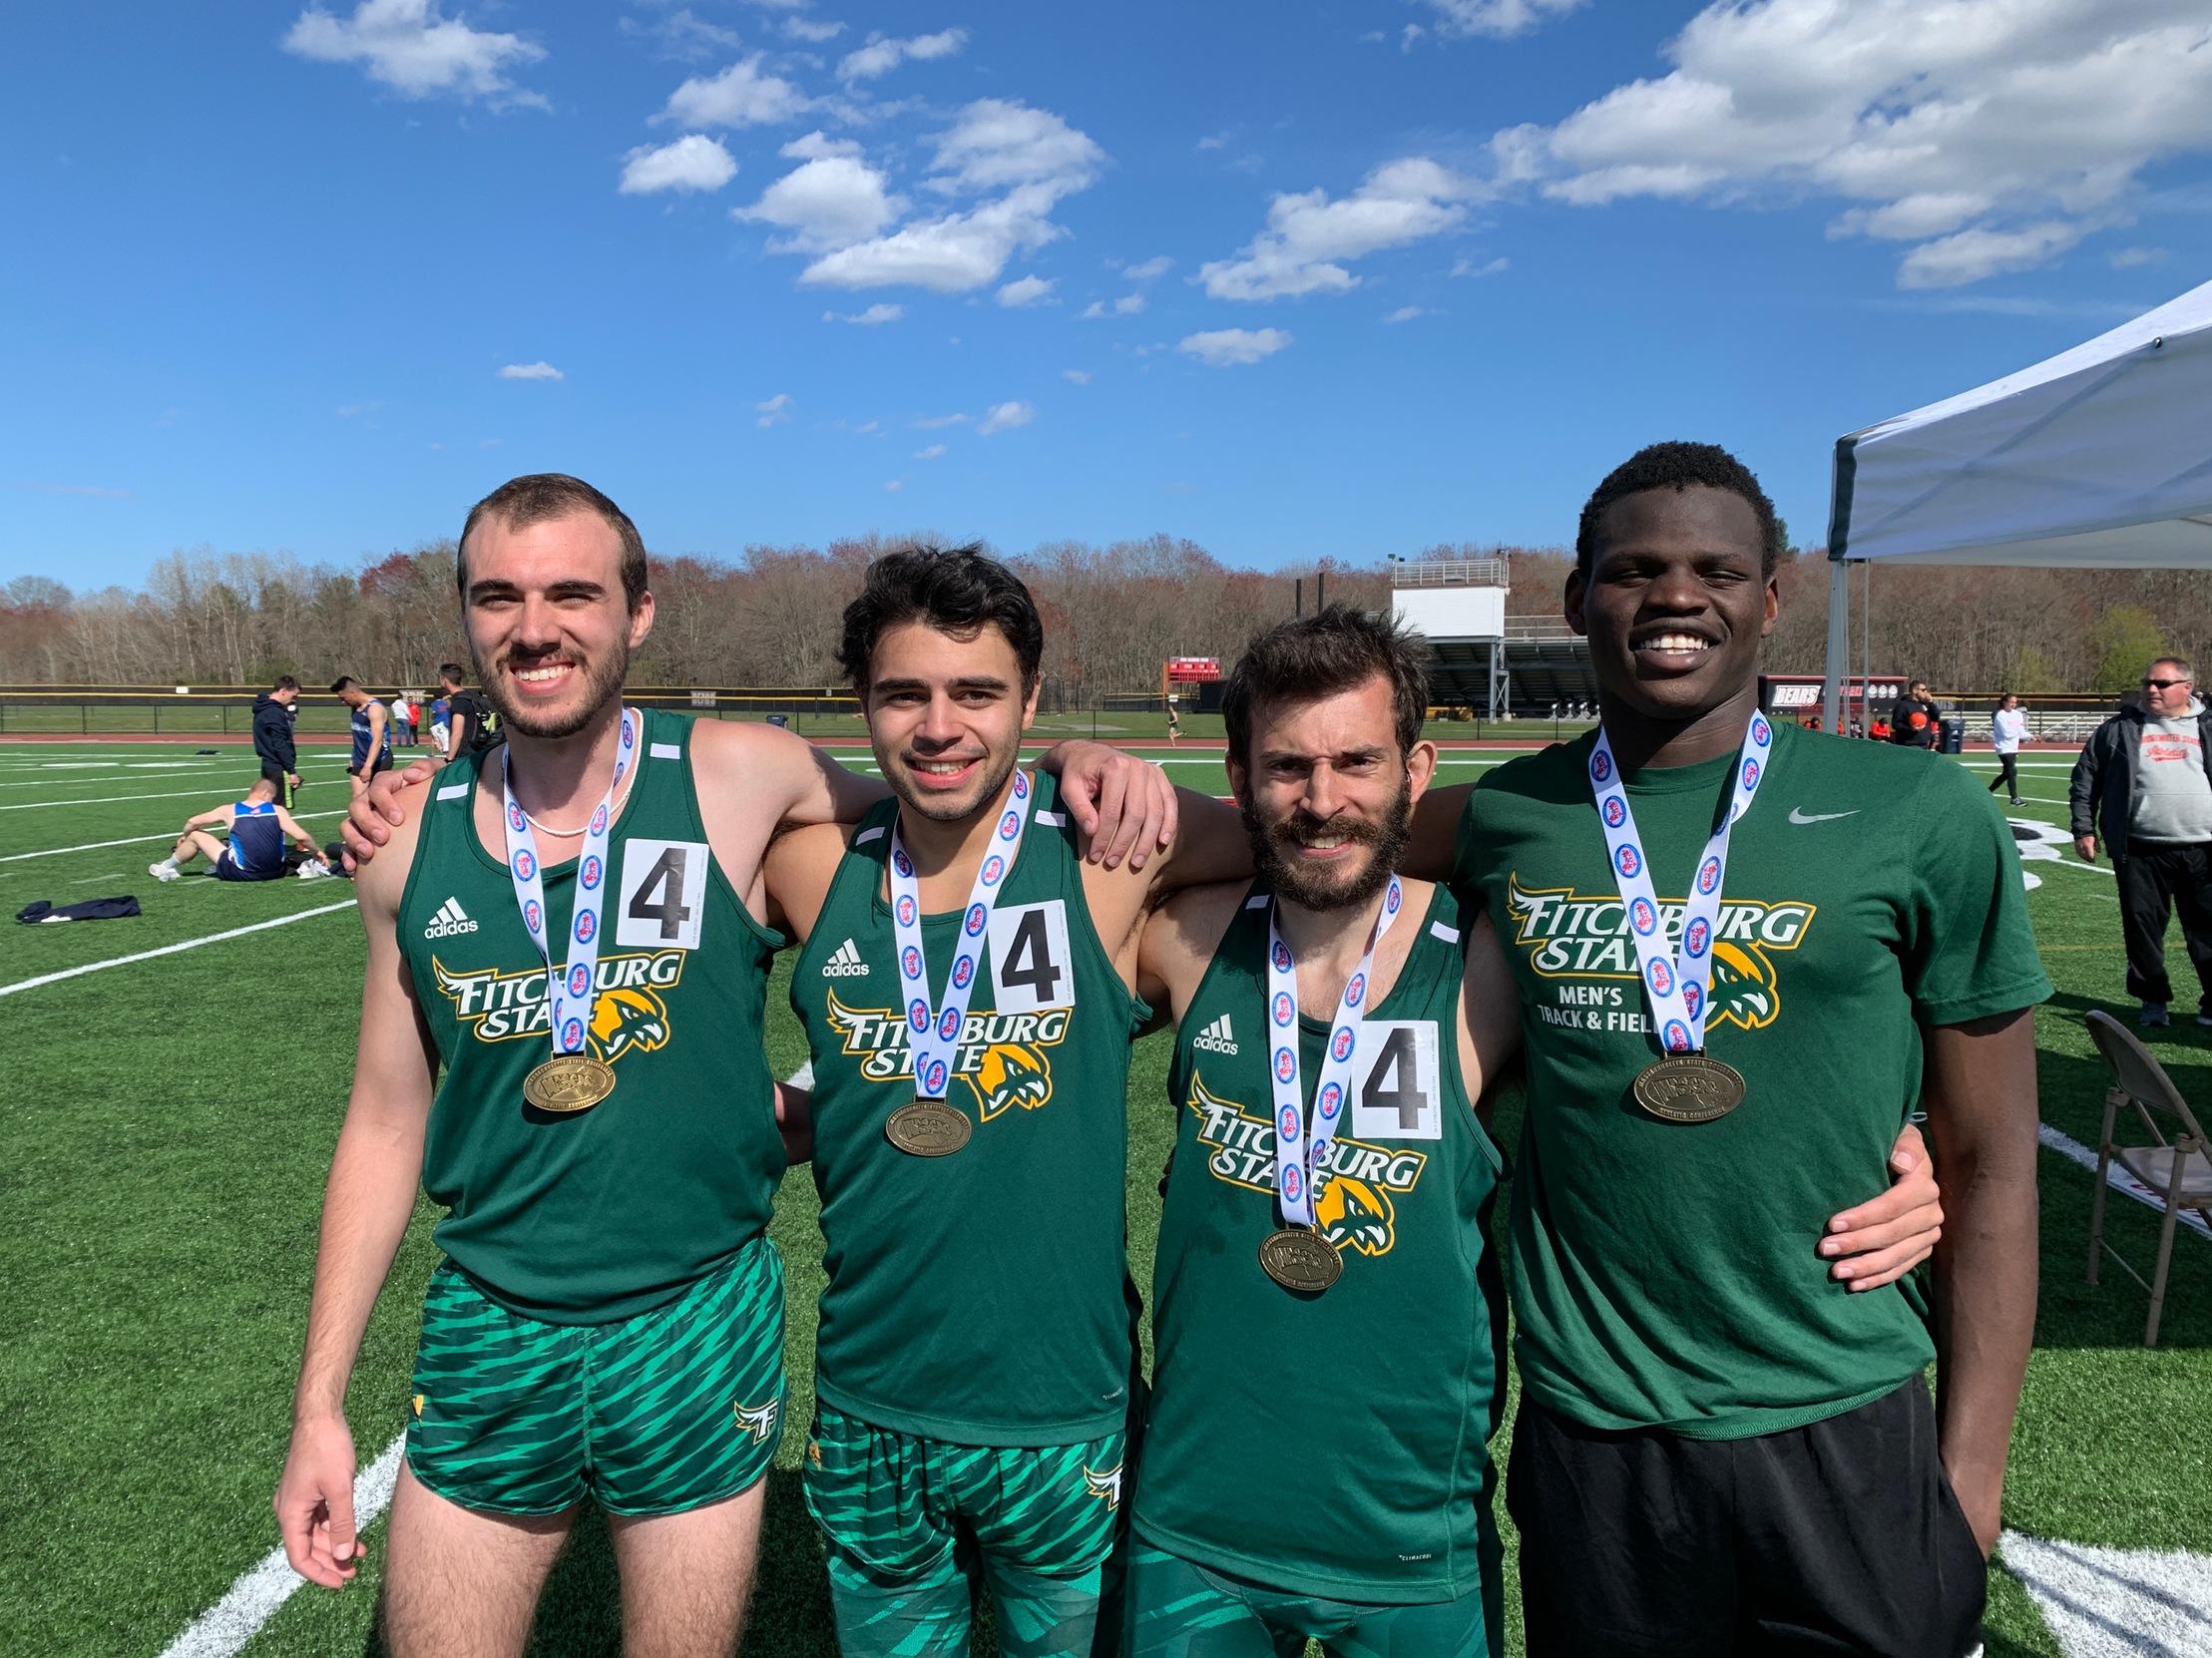 Falcons Finish Third at MASCAC Men’s Outdoor Track & Field Championship